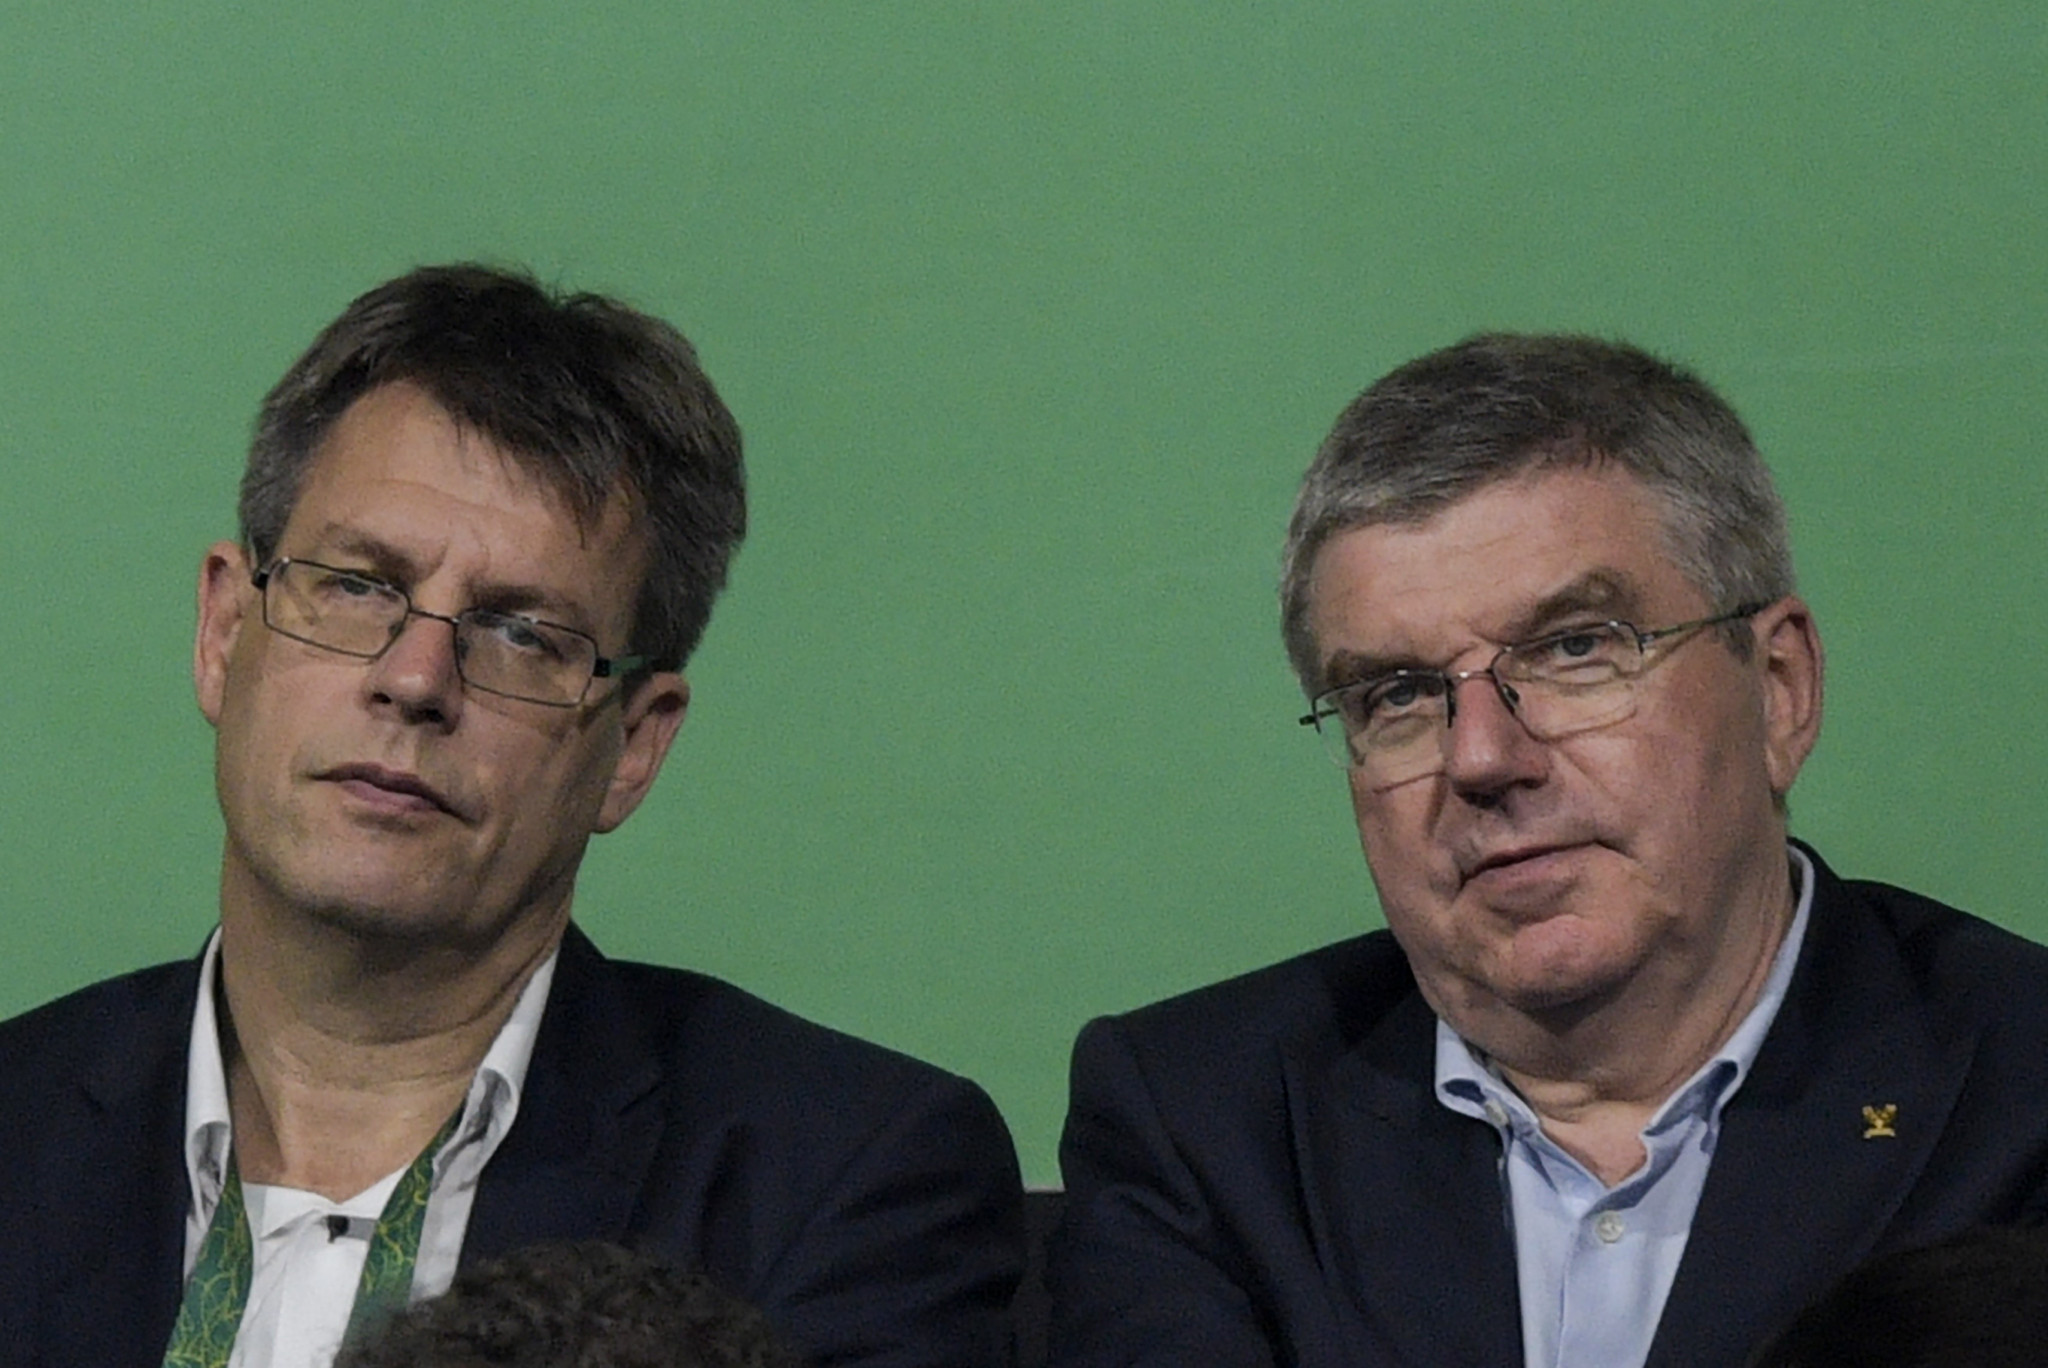 DOSB President Thomas Weikert, left, has spoken in favour of Germany bidding for the Olympics ©Getty Images